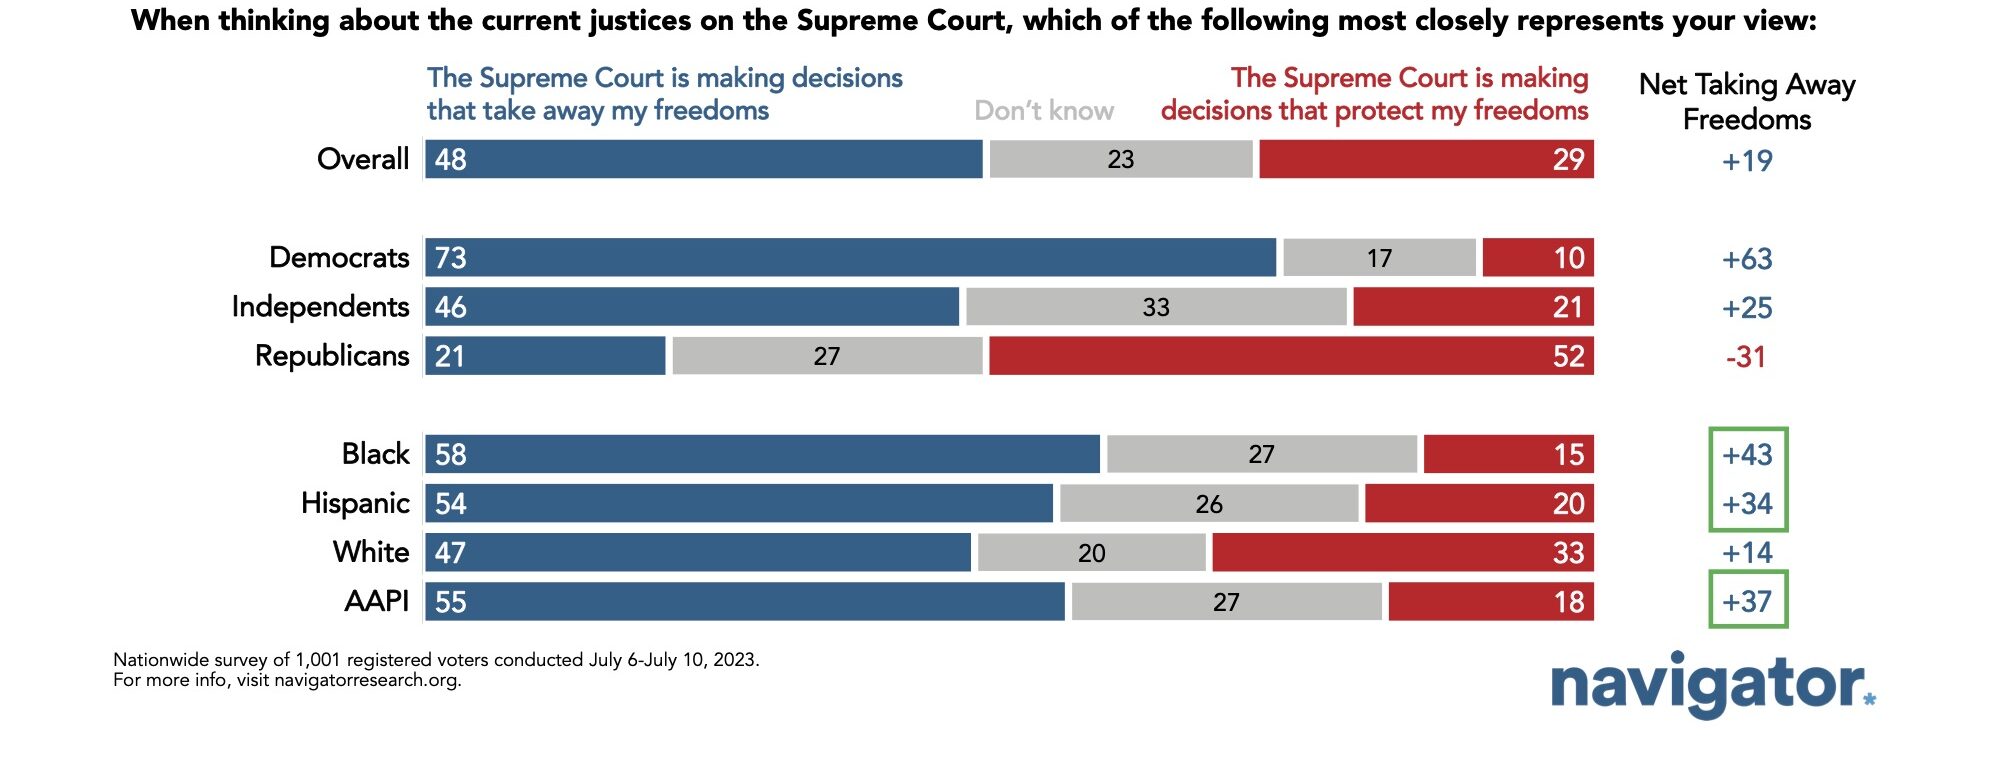 Survey results to the following prompt: When thinking about the current justices on the Supreme Court, which of the following most closely represents your view: a. The Supreme Court is making decisions that take away my freedoms. b. The Supreme Court is making decisions that protect my freedoms